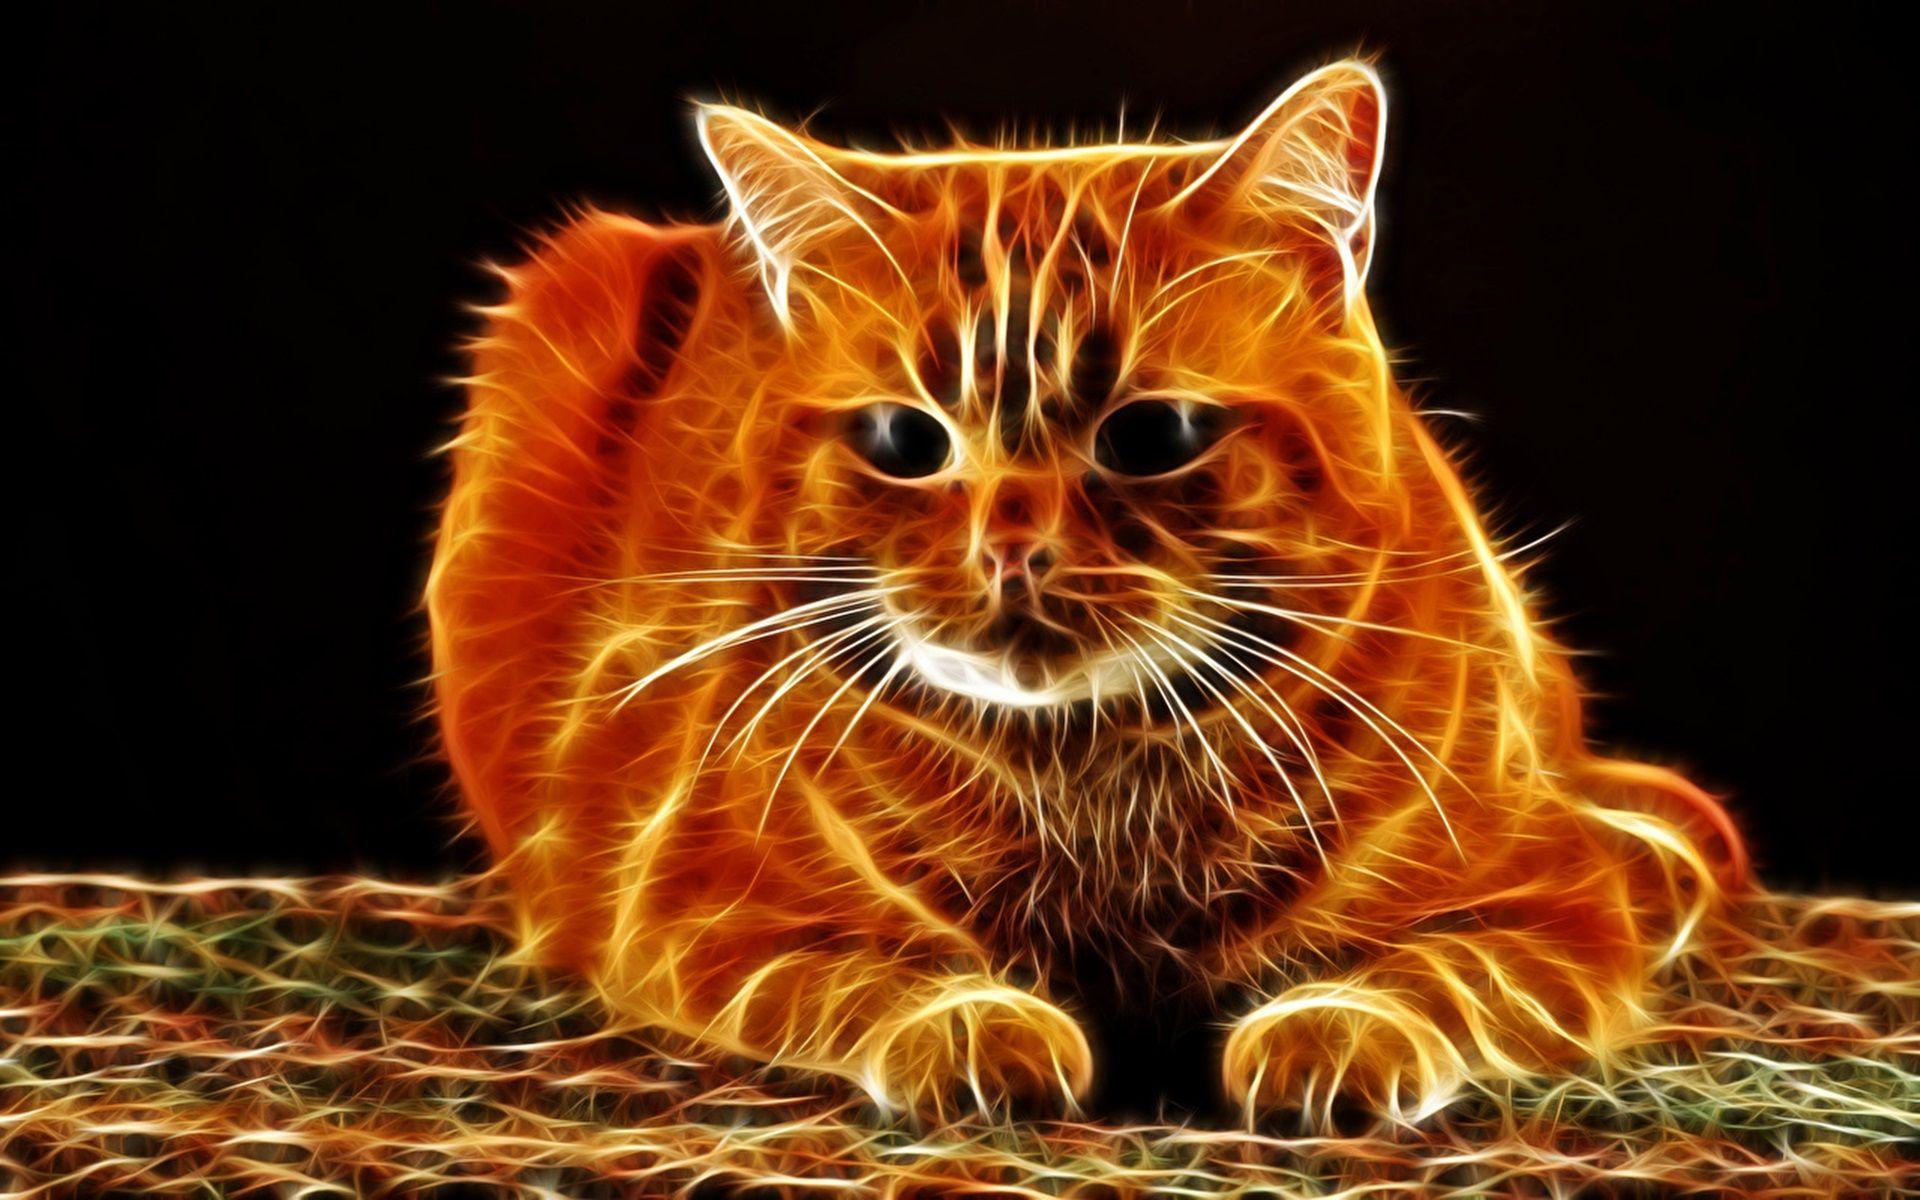 Abstract Cat Wallpapers - Top Free Abstract Cat Backgrounds ...